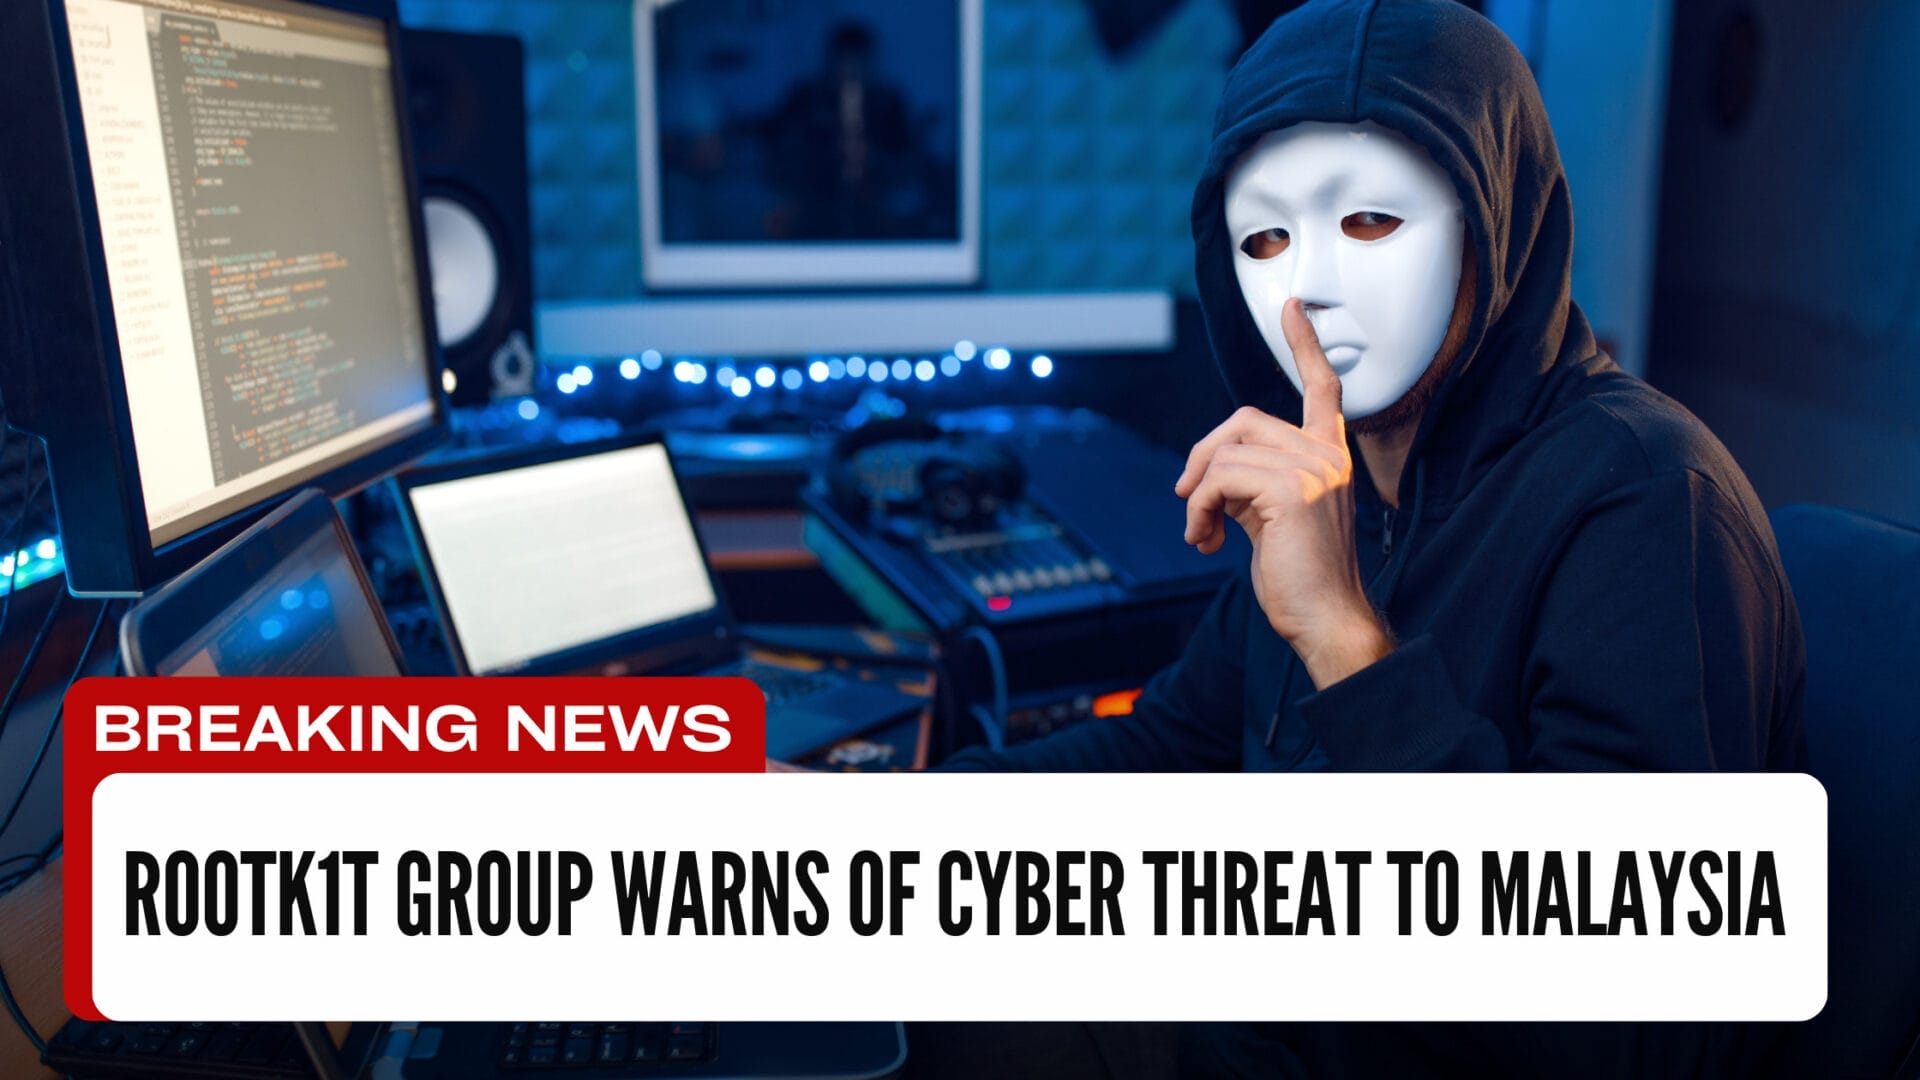 In the ever-evolving landscape of cyber threats, the latest warning comes from the notorious R00TK1T group, notorious for its sophisticated cyber intrusions